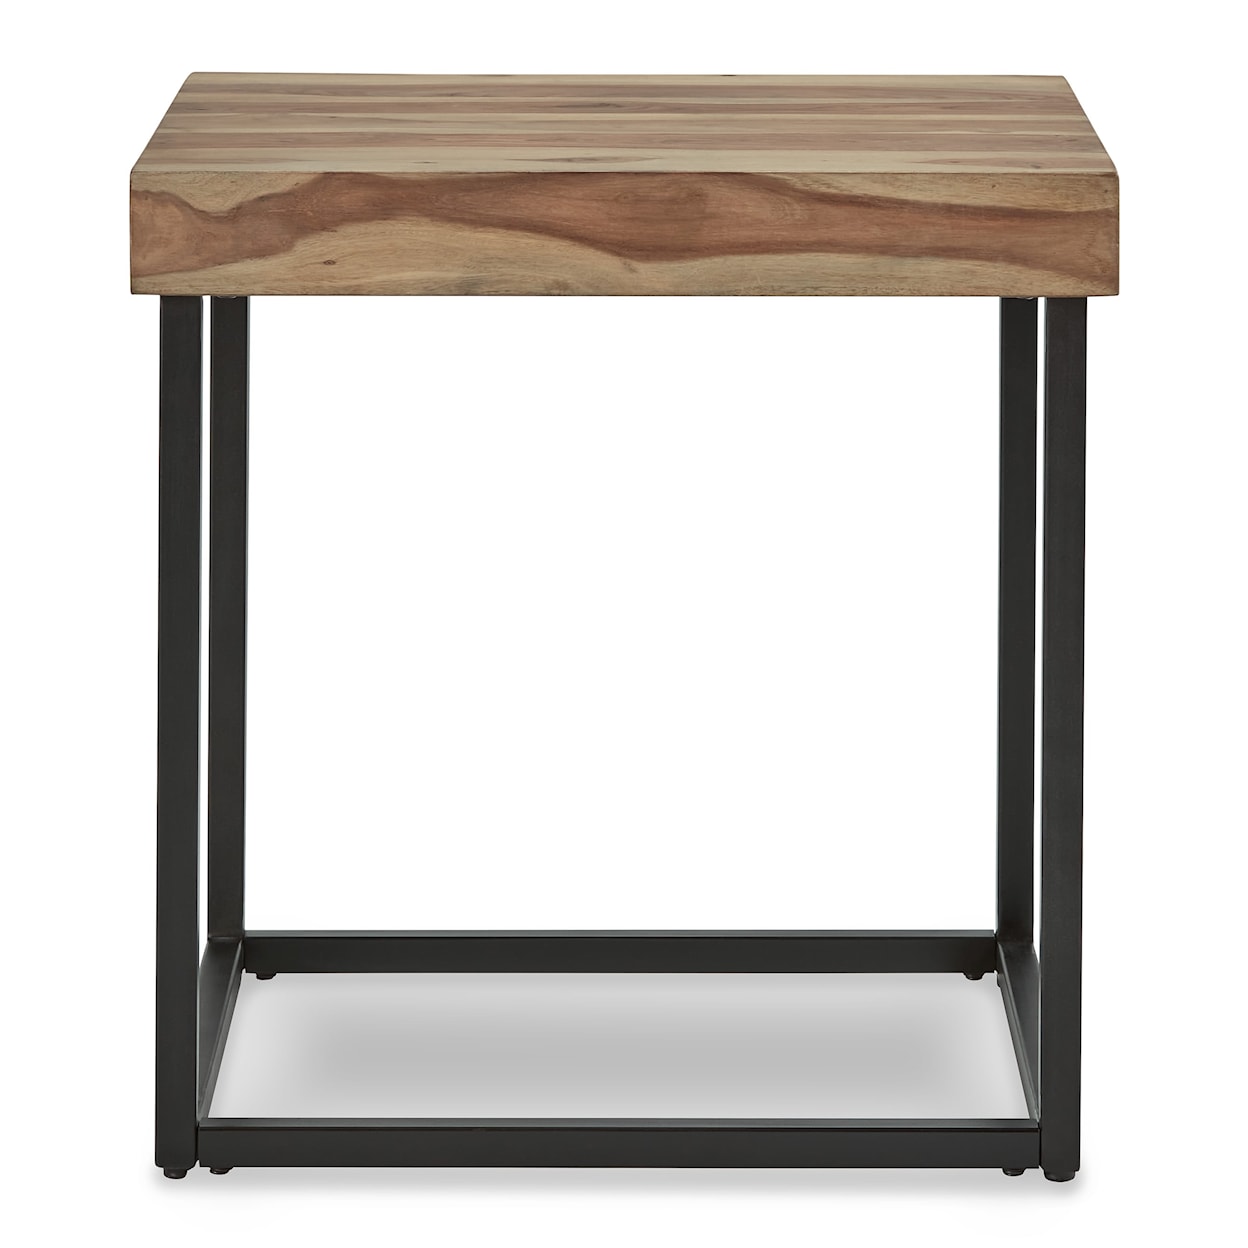 Signature Design by Ashley Bellwick Casual End Table